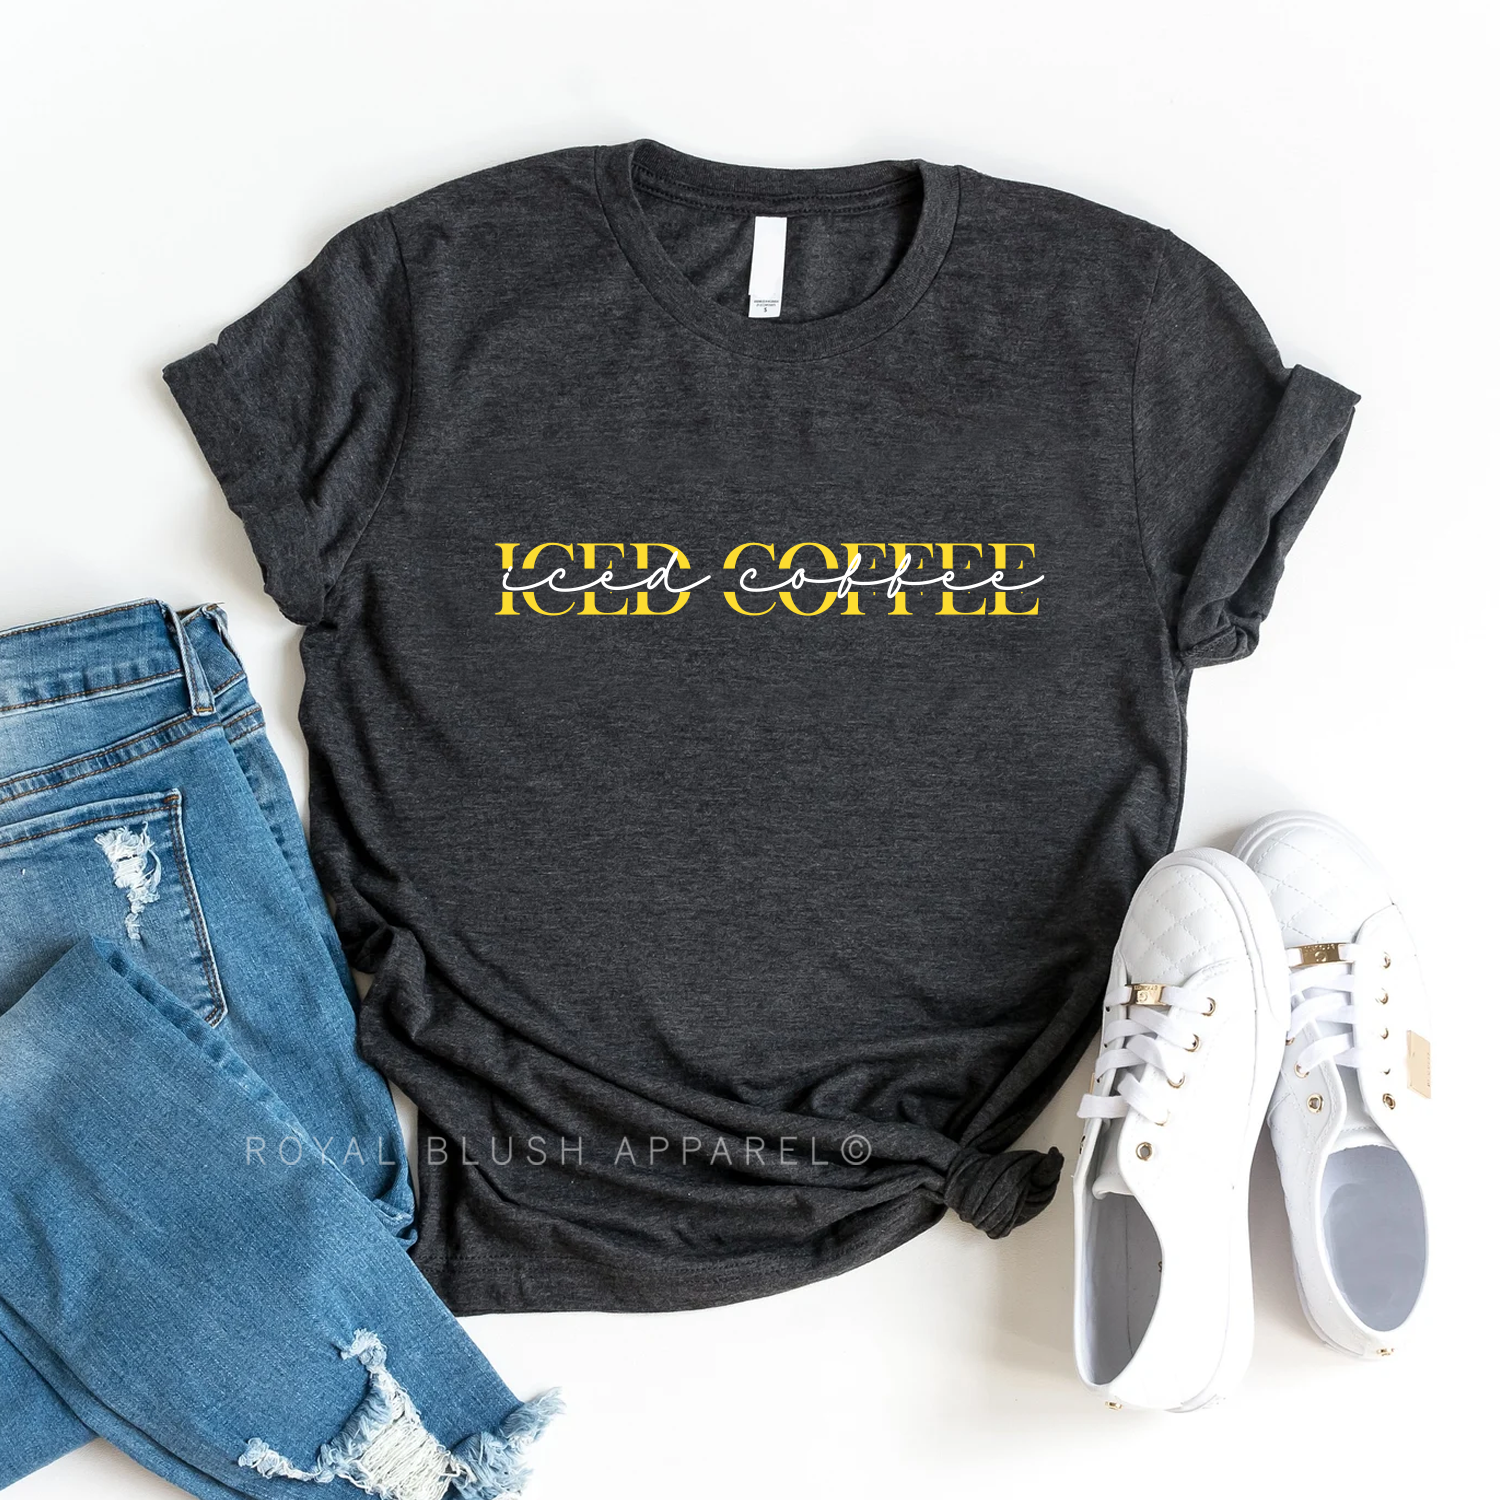 Iced Coffee Yellow Relaxed Unisex T-shirt